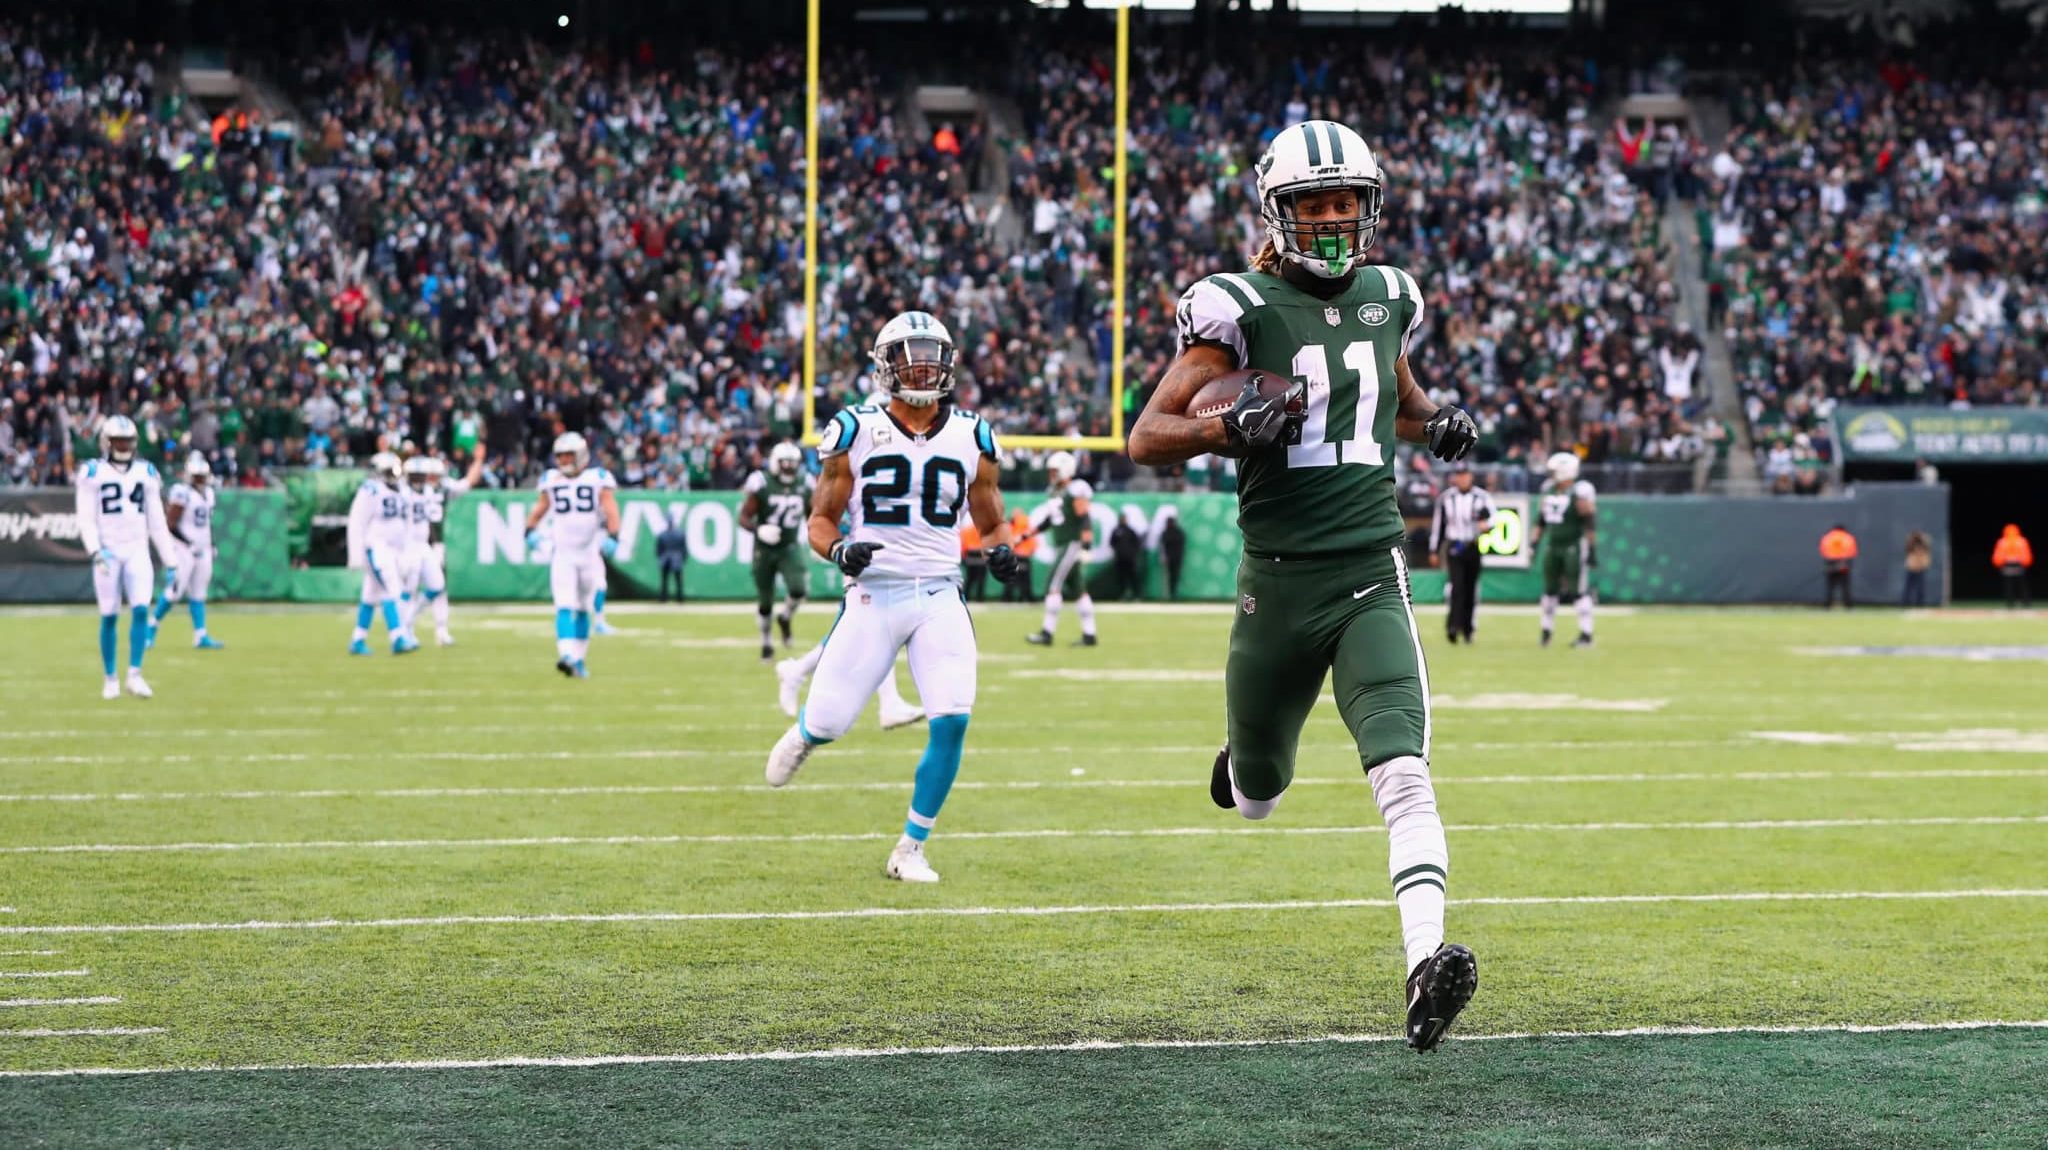 EAST RUTHERFORD, NJ - NOVEMBER 26: Wide receiver Robby Anderson #11 of the New York Jets scores a touchdown during the third quarter of the game at MetLife Stadium on November 26, 2017 in East Rutherford, New Jersey.